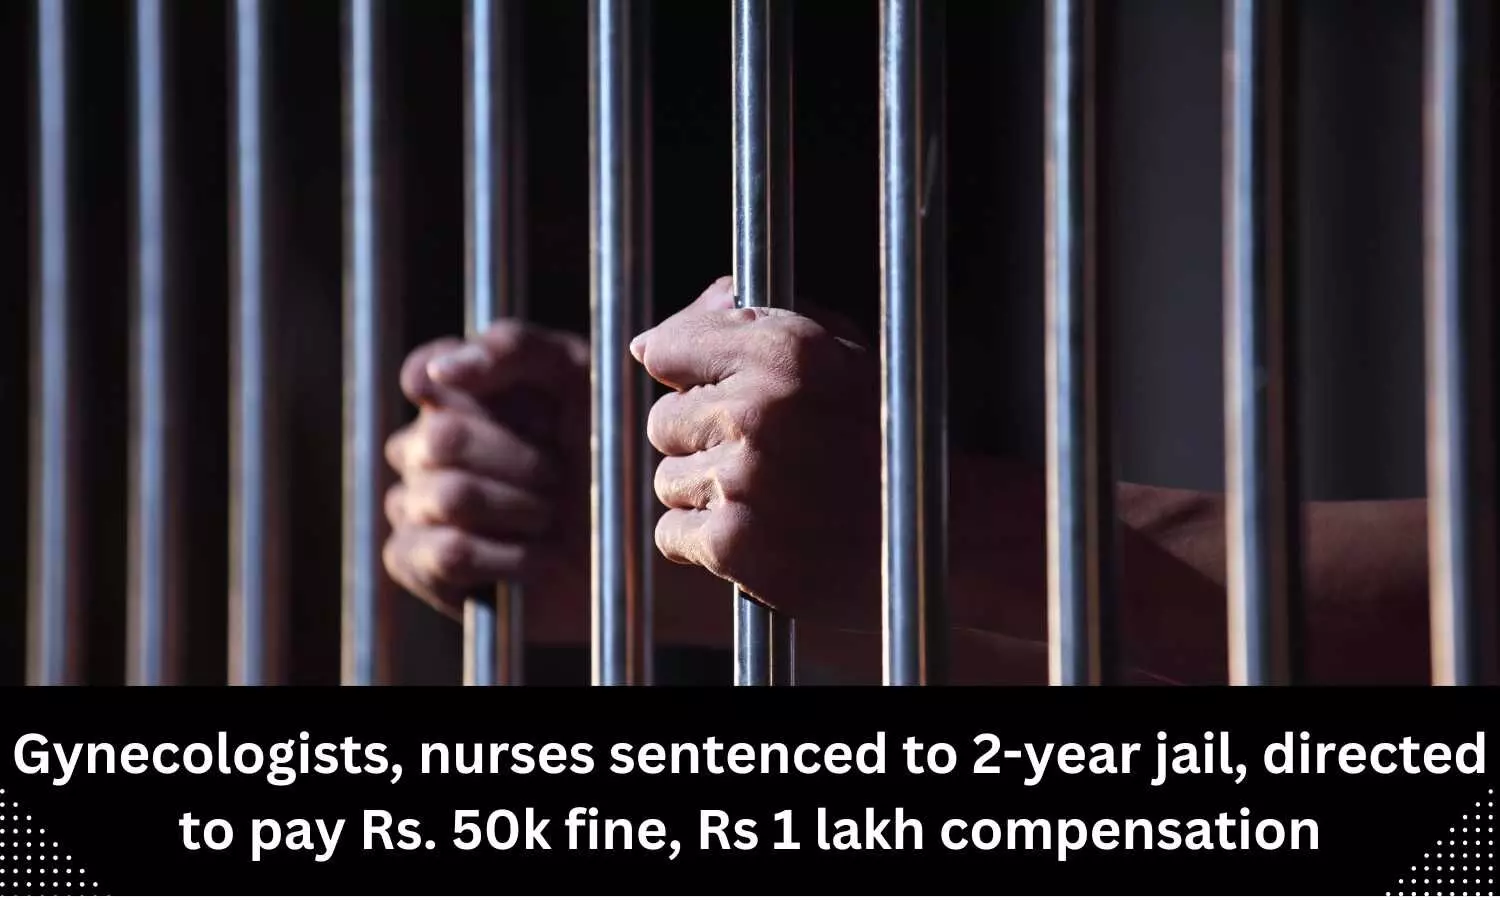 2 Gynecologists, 3 nurses sentenced to 2-year jail, directed to pay Rs 50k fine, Rs 1 lakh compensation